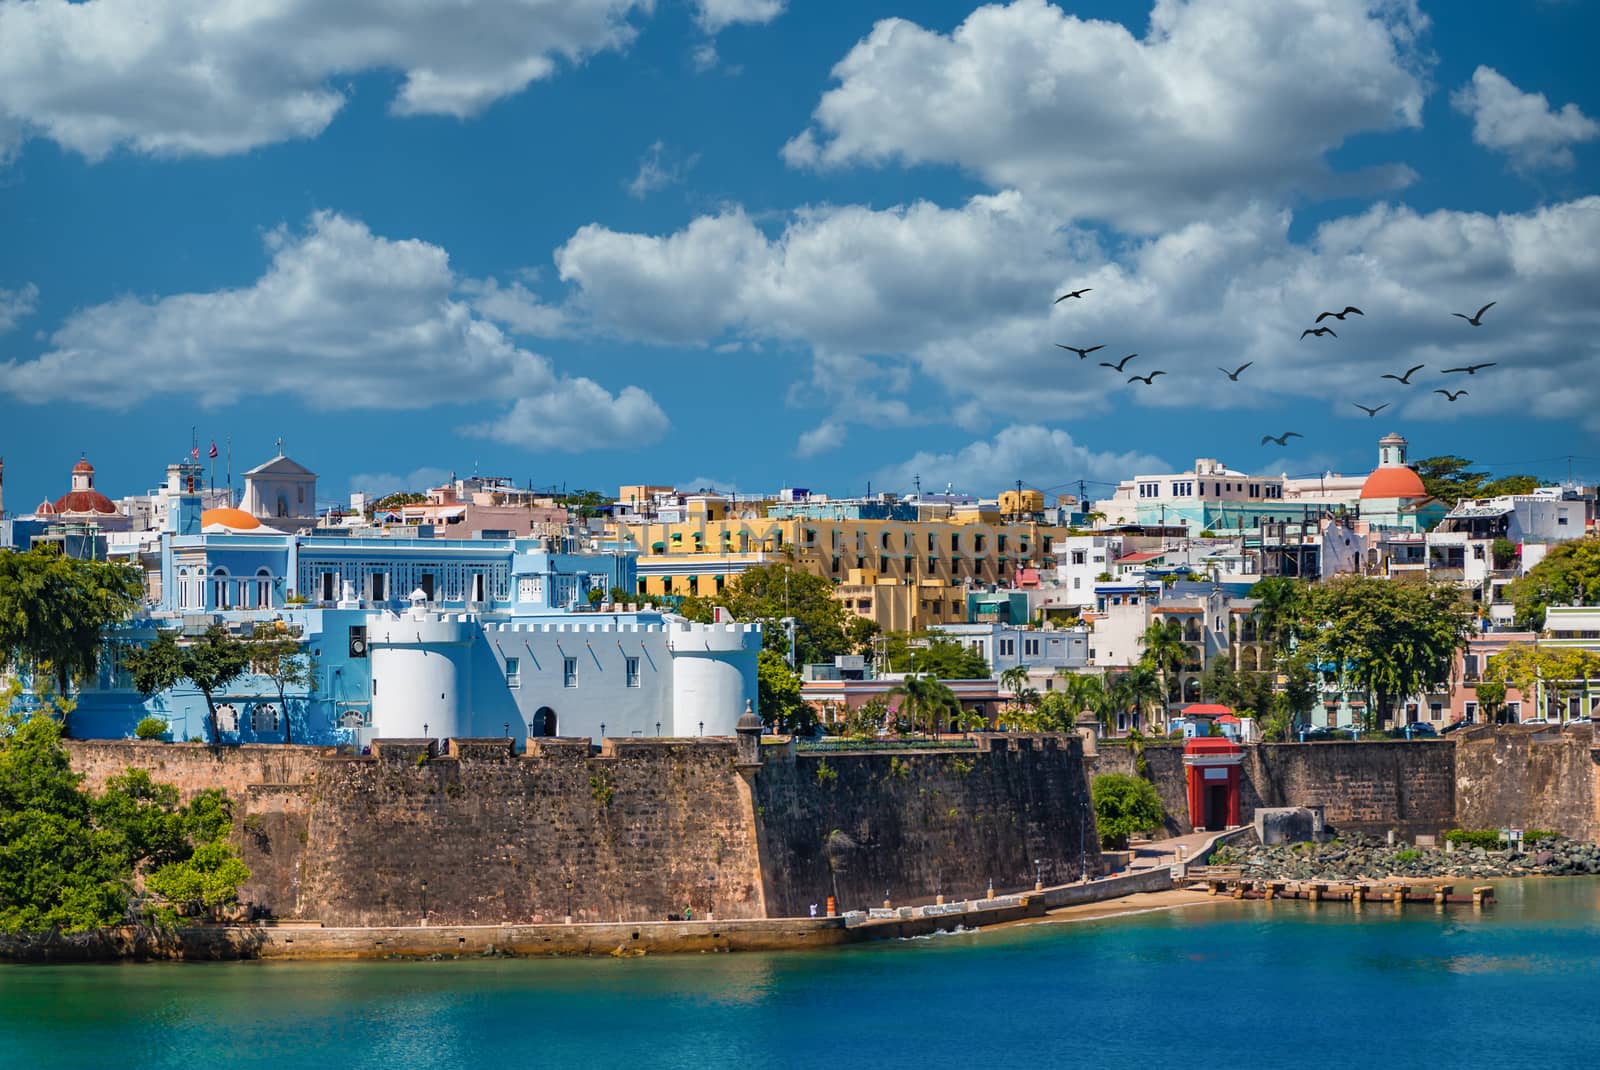 Colorful Hill Over San Juan Harbor by dbvirago